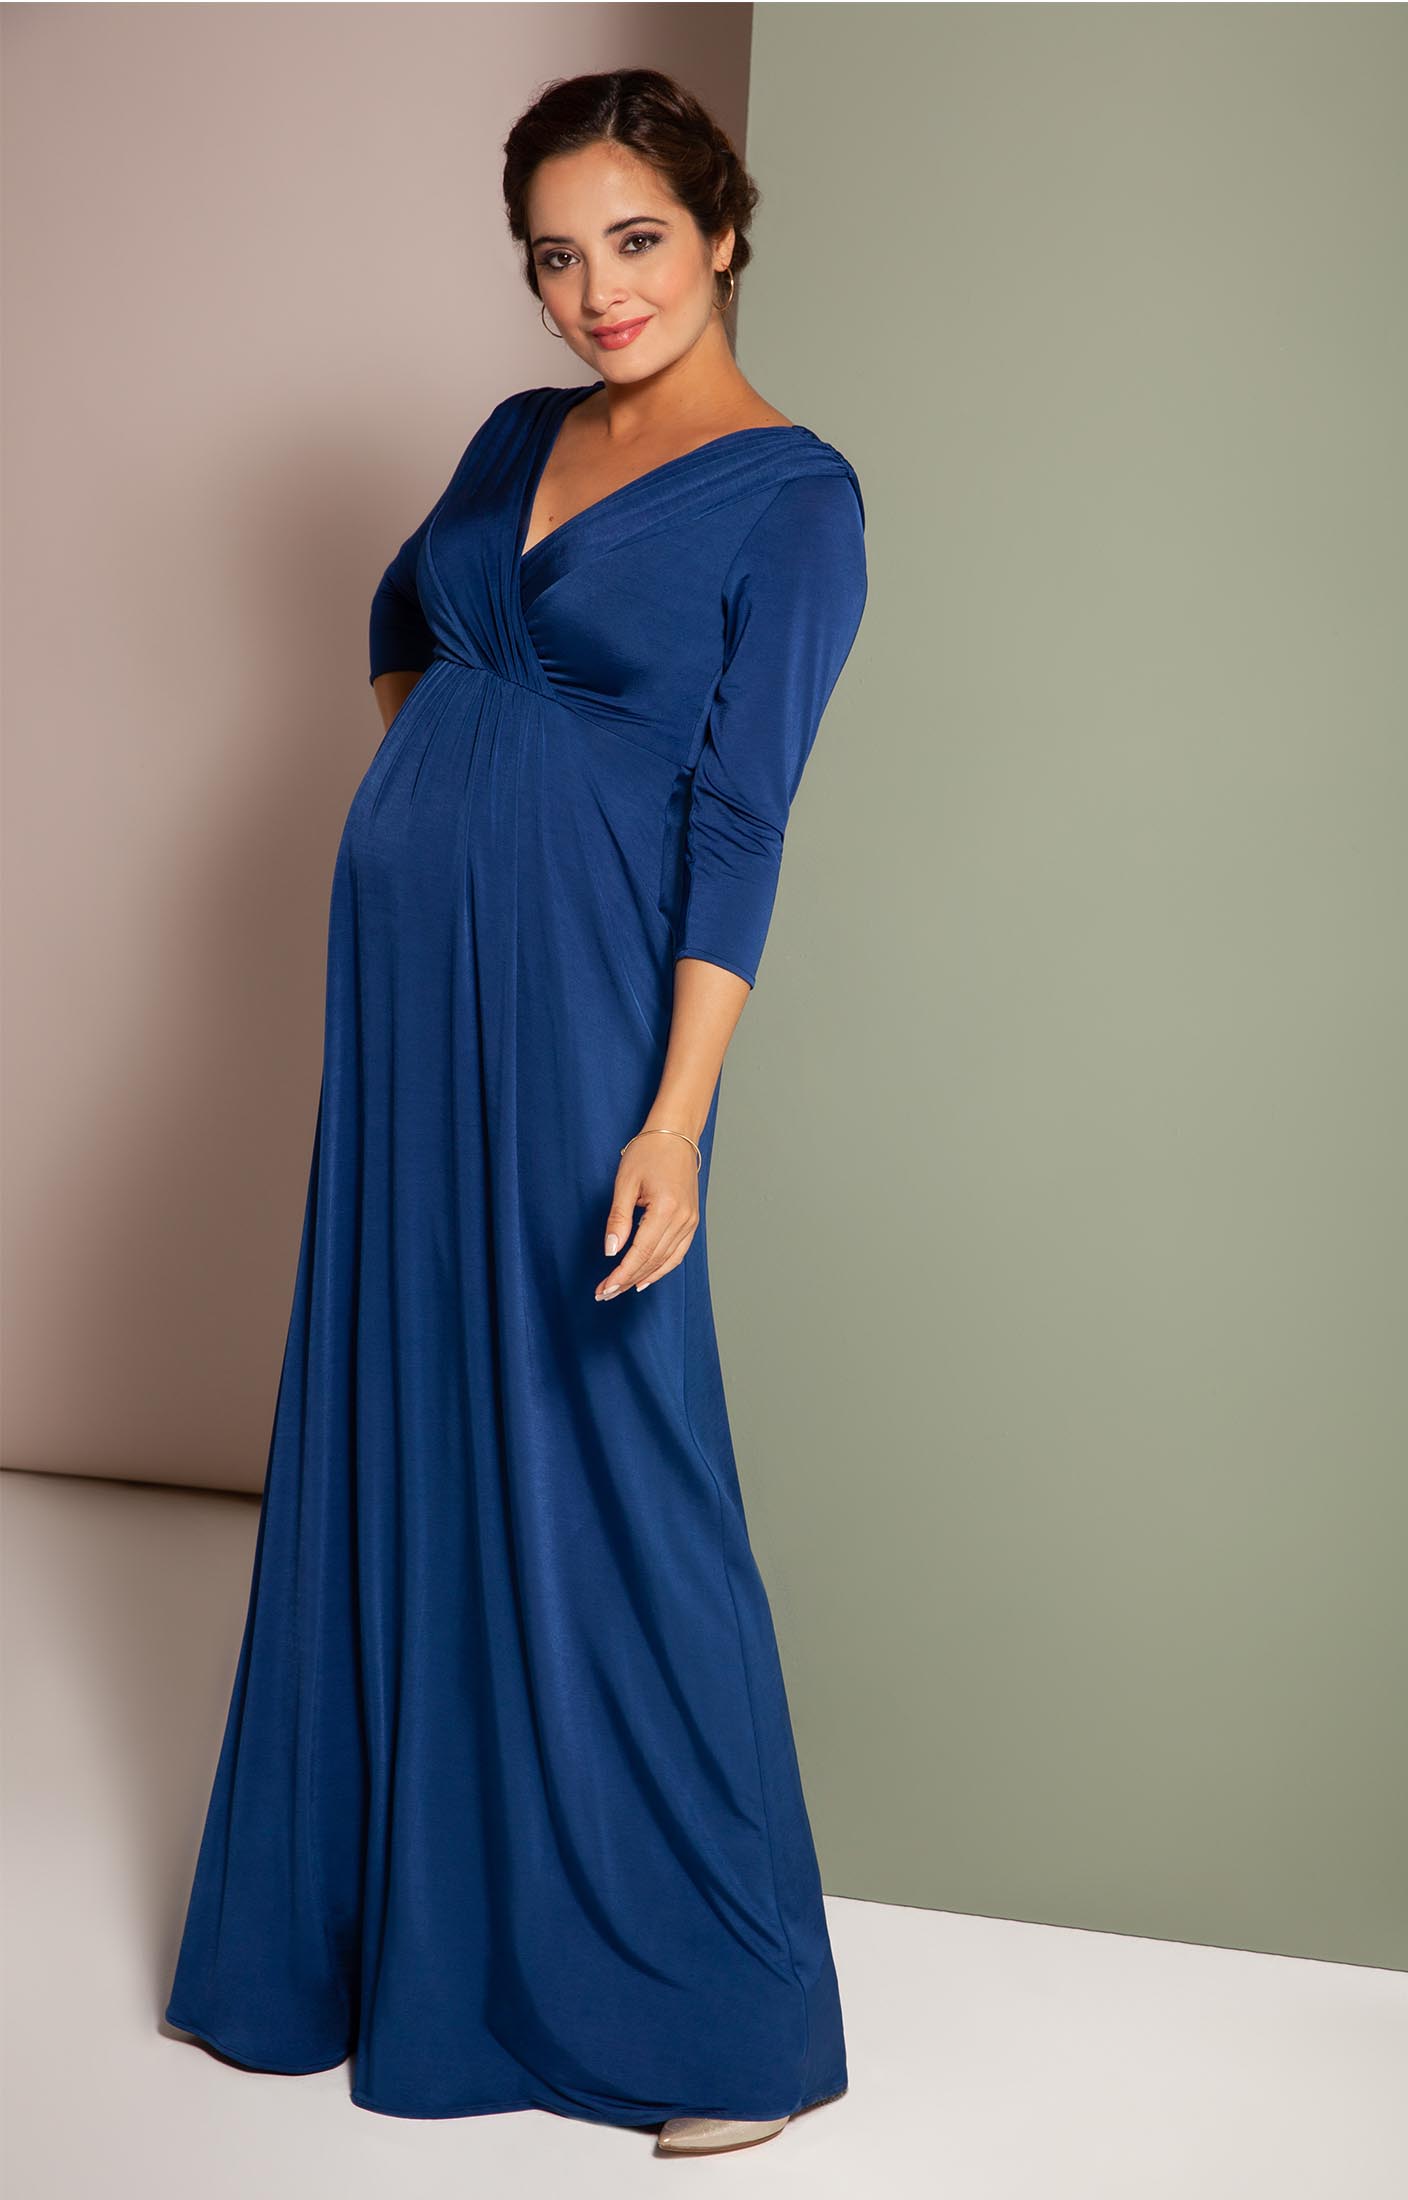 Willow Maternity Gown Imperial Blue Maternity Wedding Dresses Evening Wear And Party Clothes 